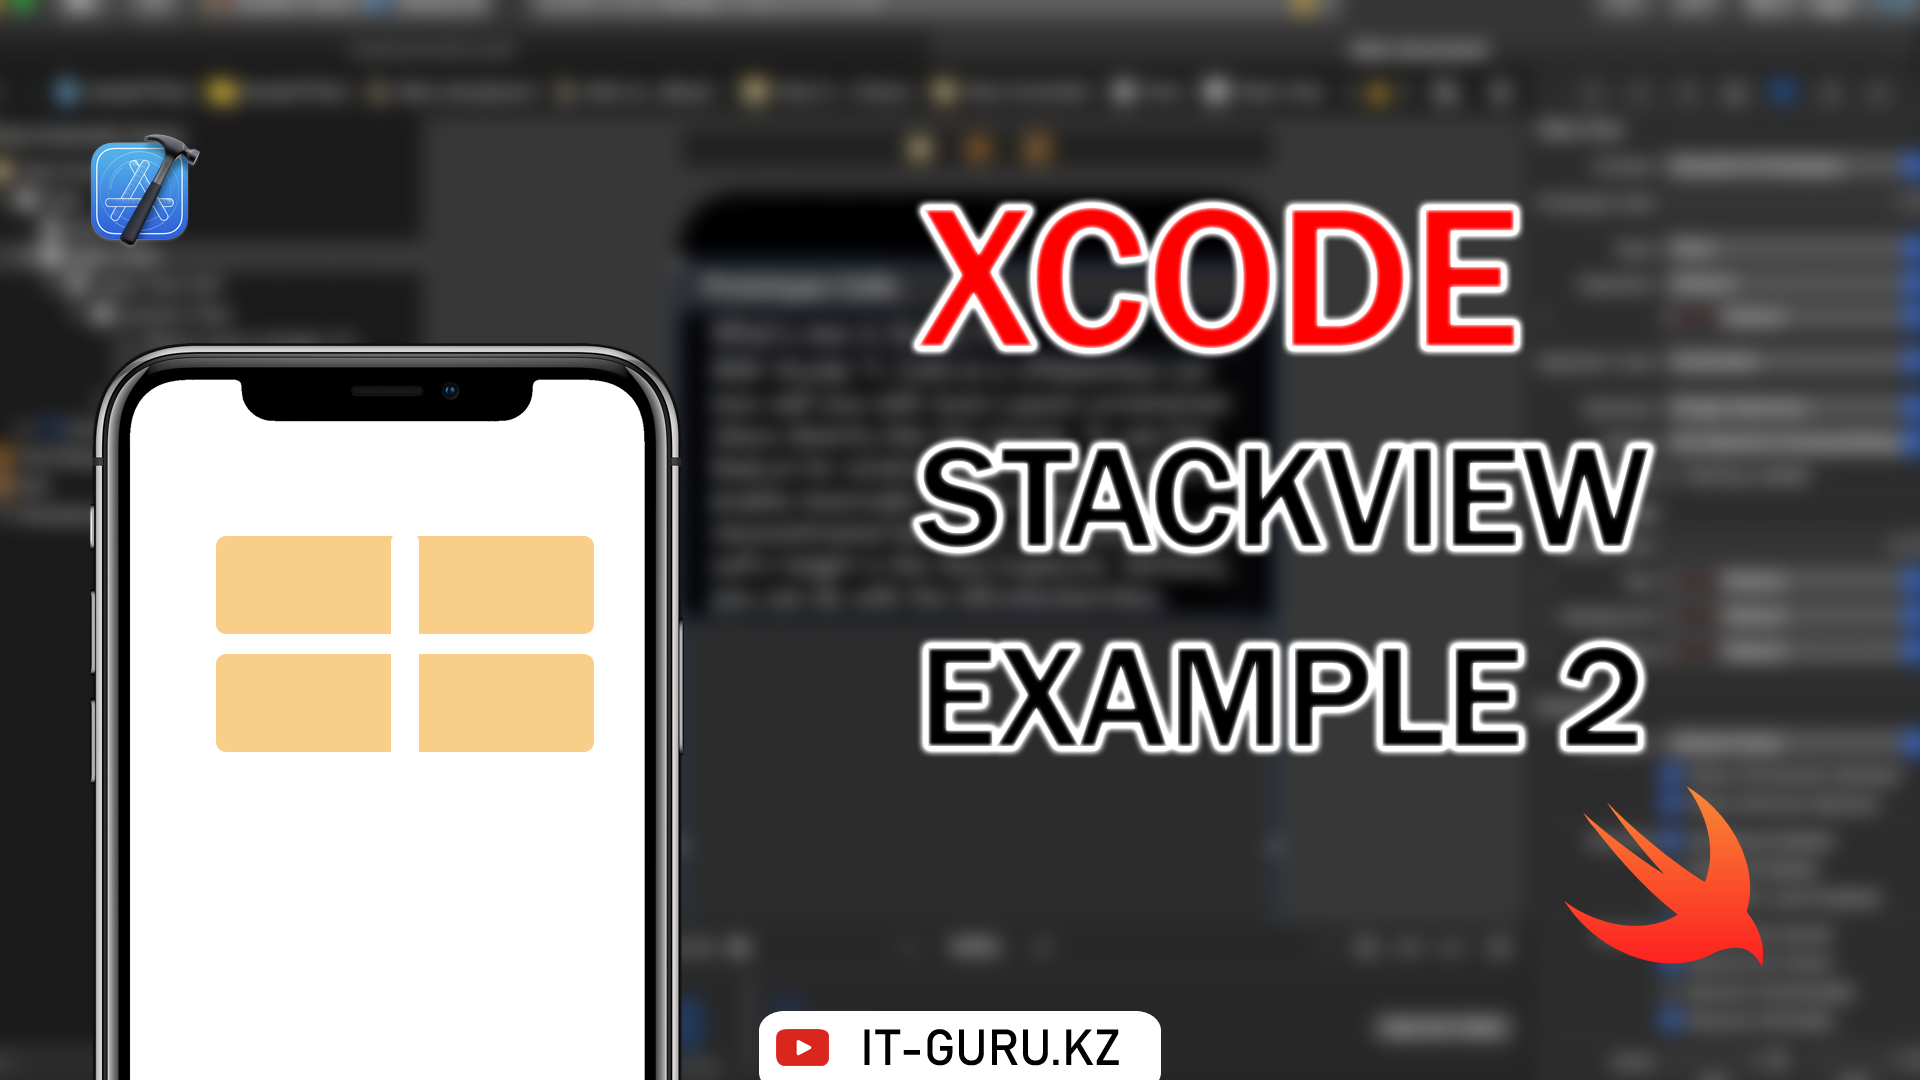 StackView Example 2 in Xcode